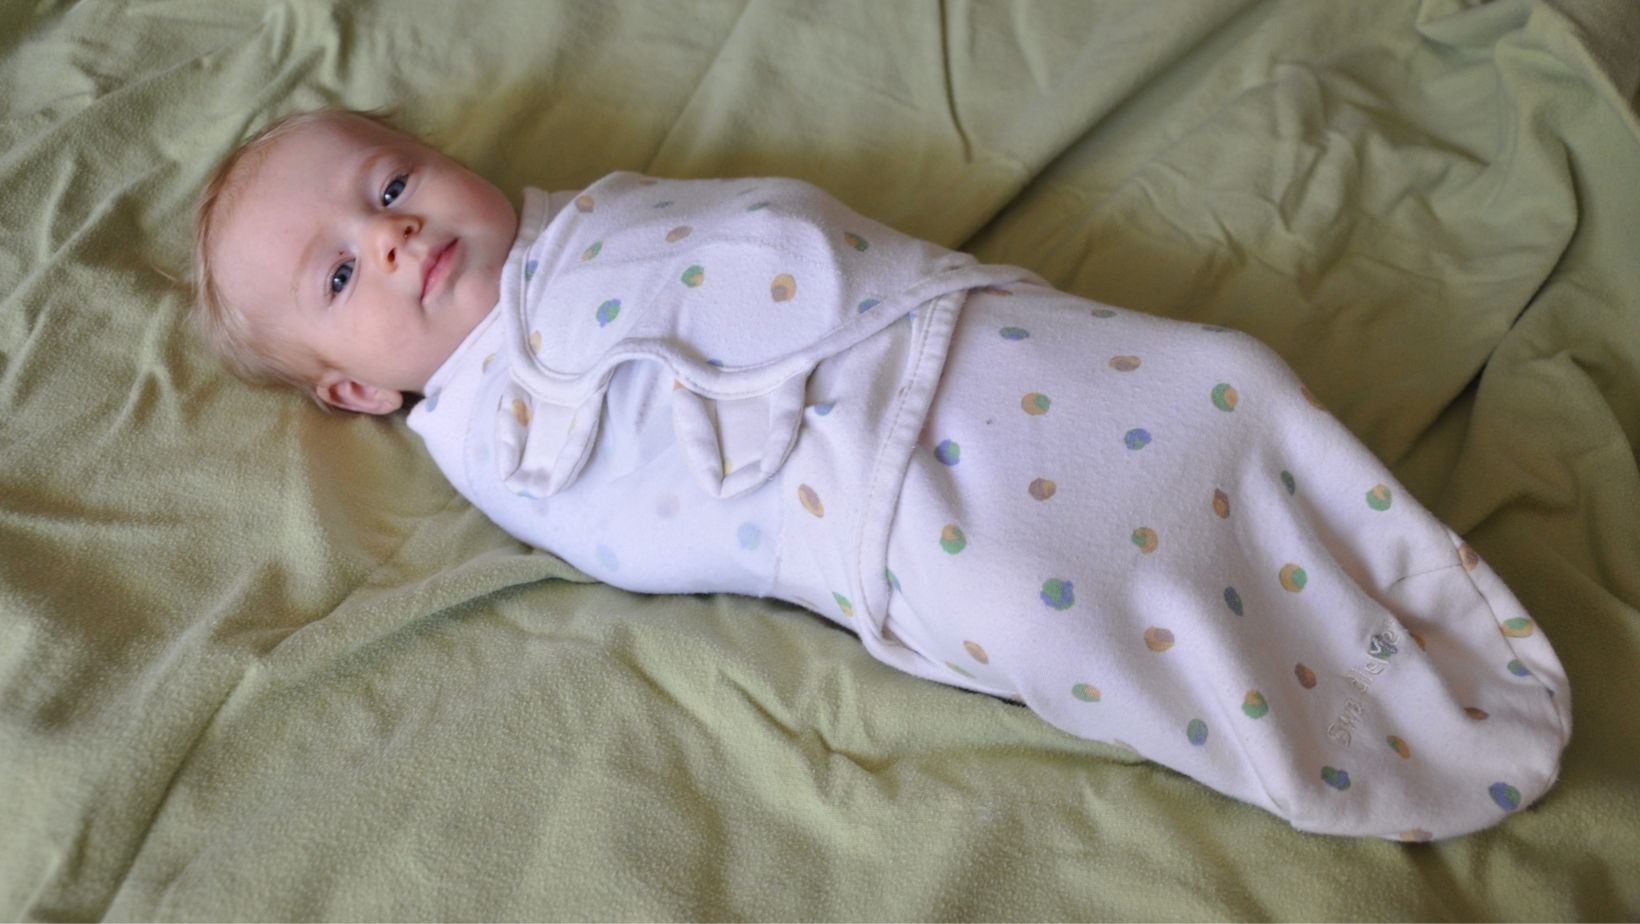 A baby wrapped in a sleep sack.